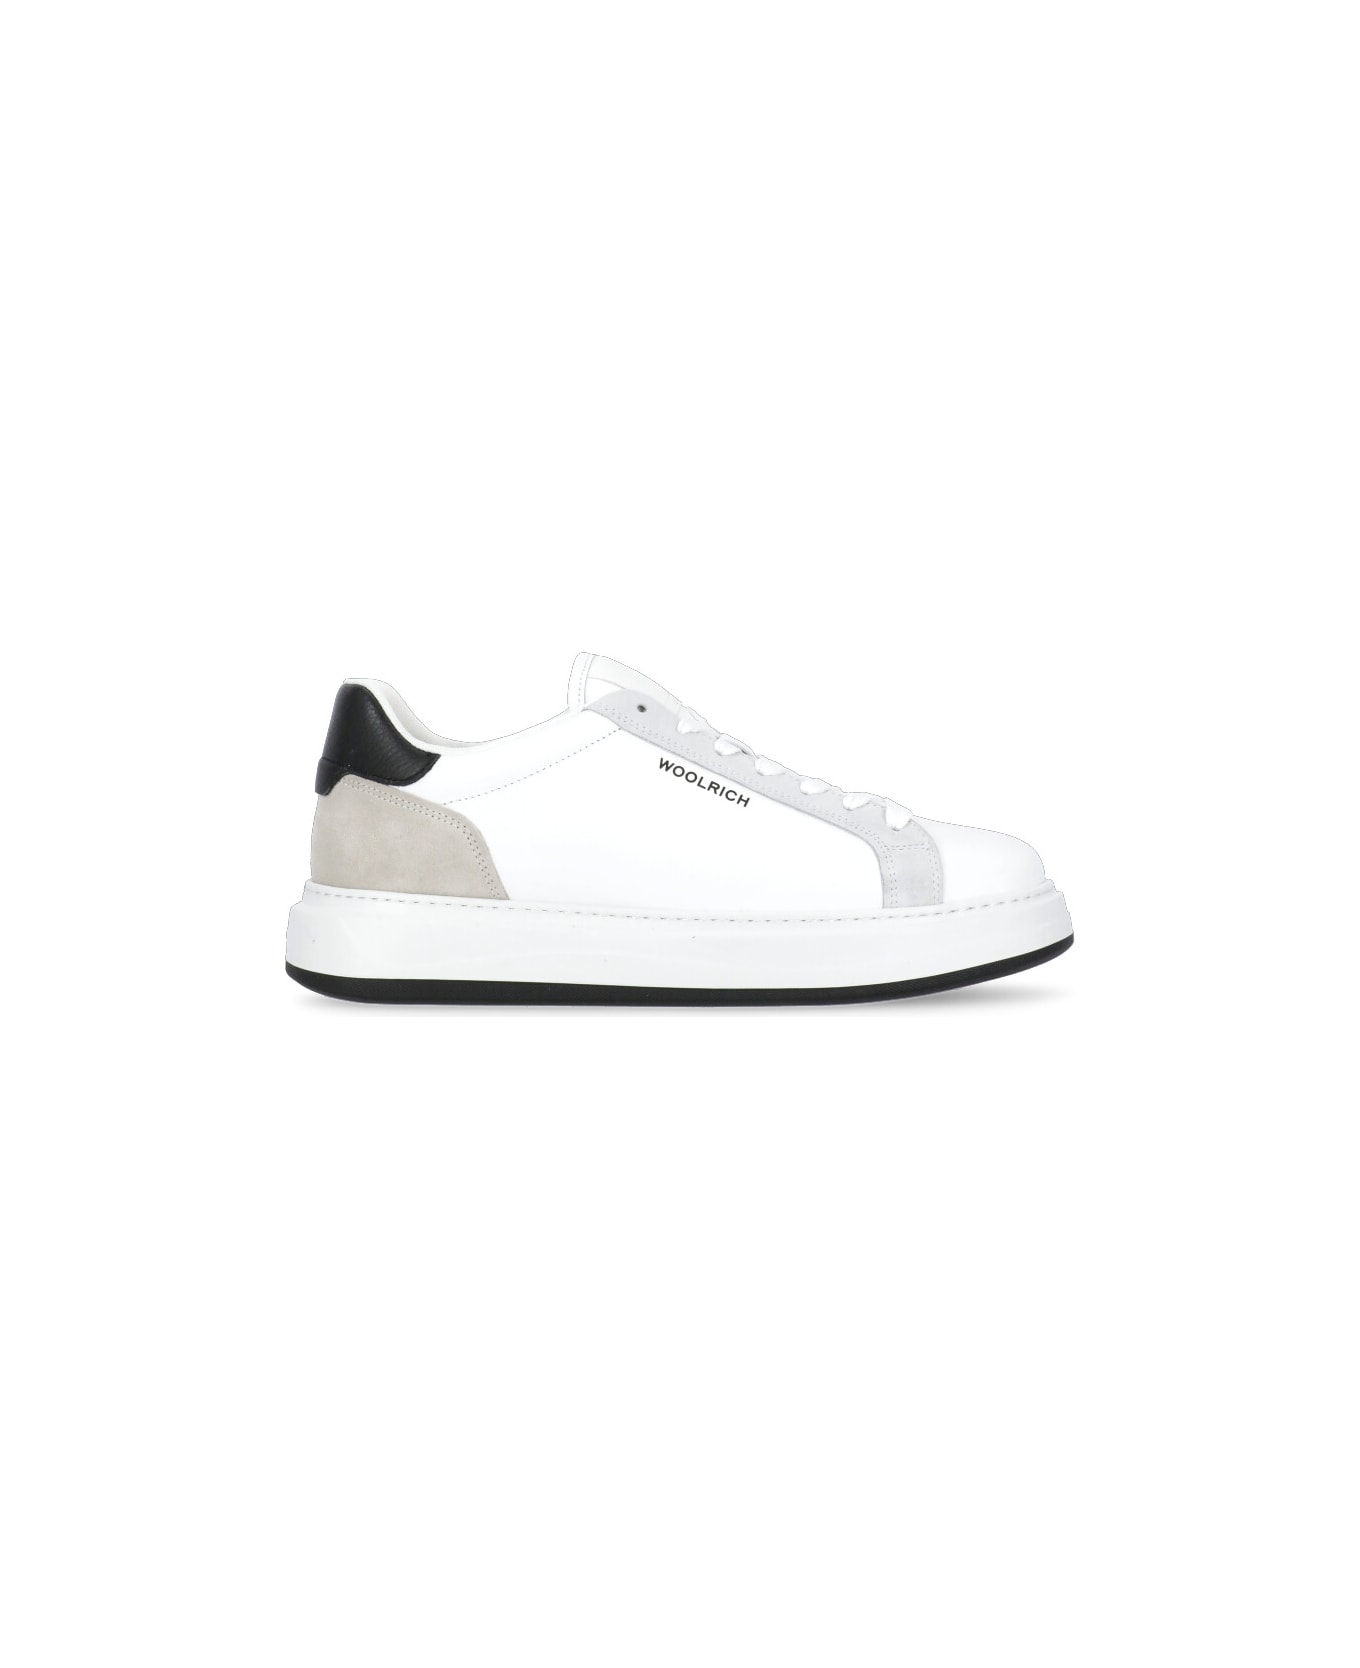 Woolrich 'arrow' Leather Sneakers - White